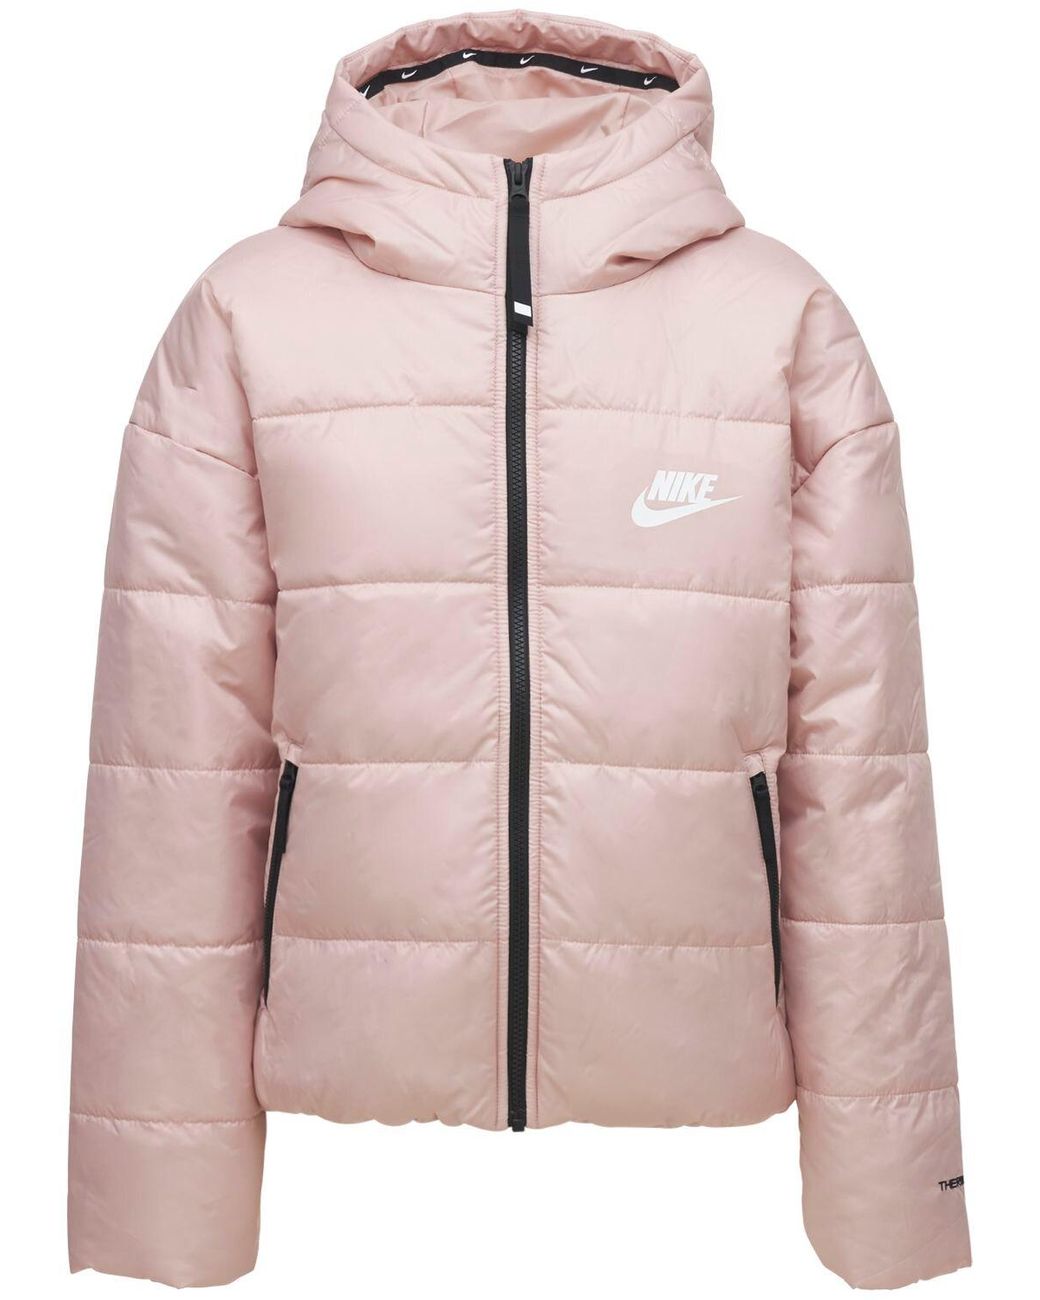 Nike Therma Fit Classic Puffer Jacket in Pink | Lyst UK